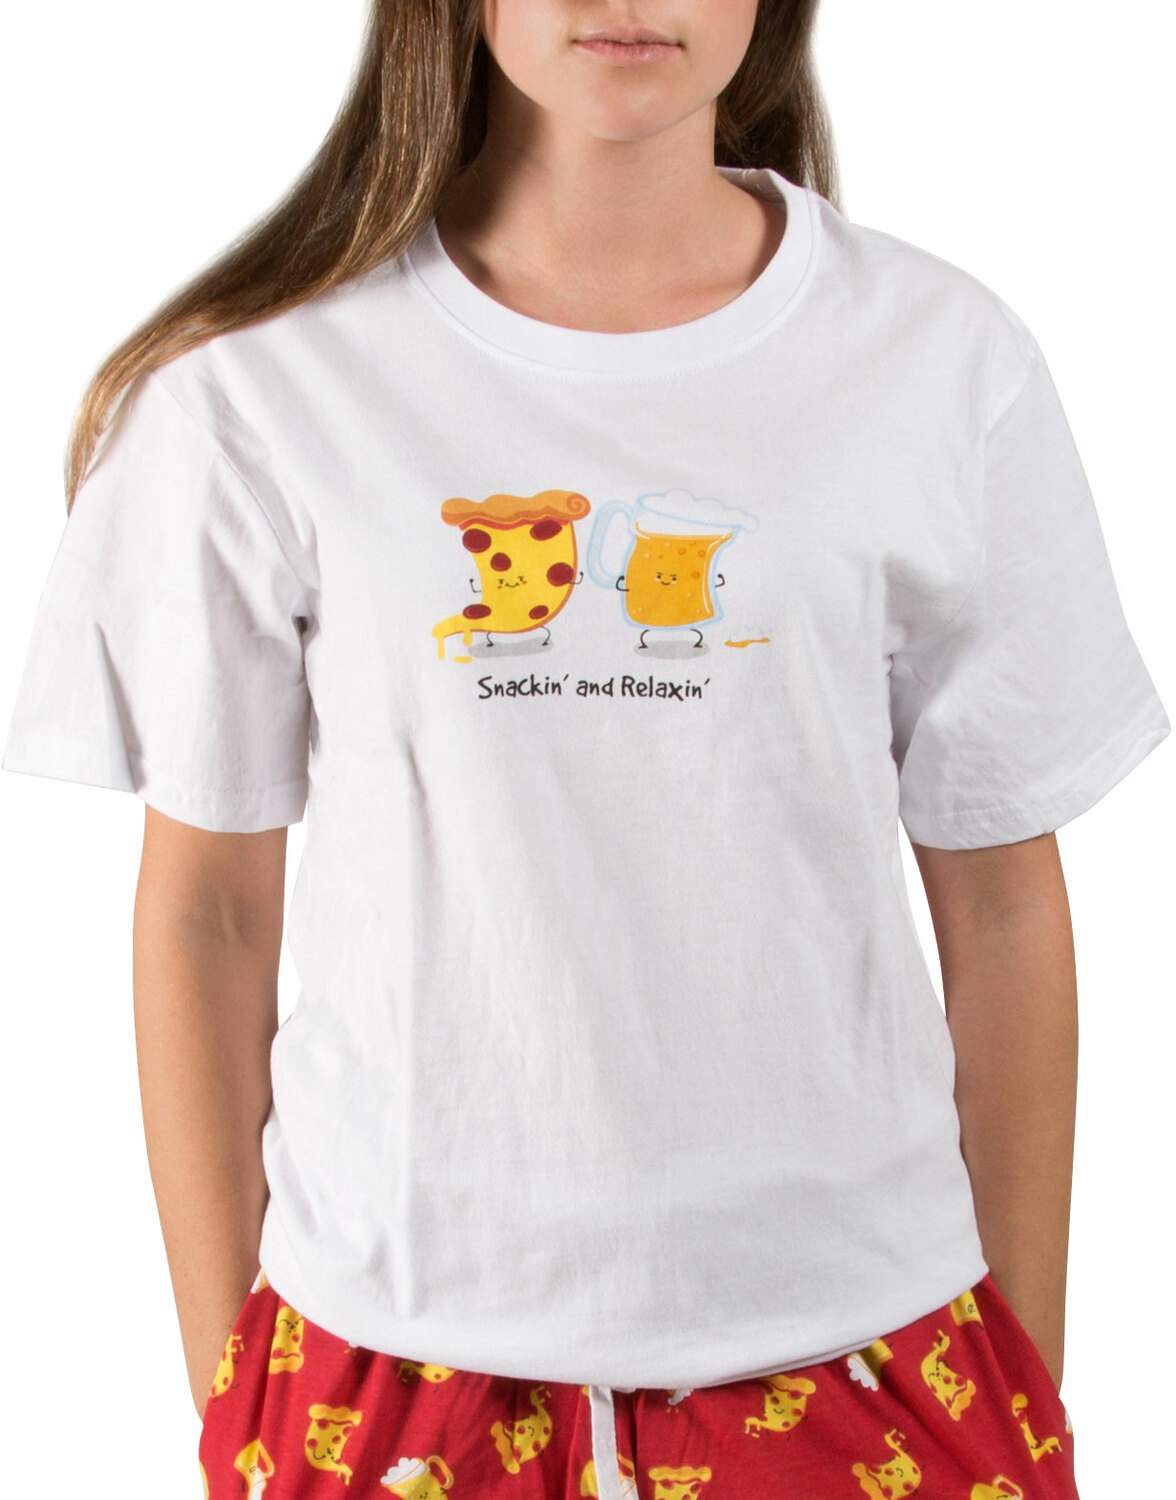 Beer and Pizza by Late Night Snacks - Beer and Pizza - XL Unisex T-Shirt